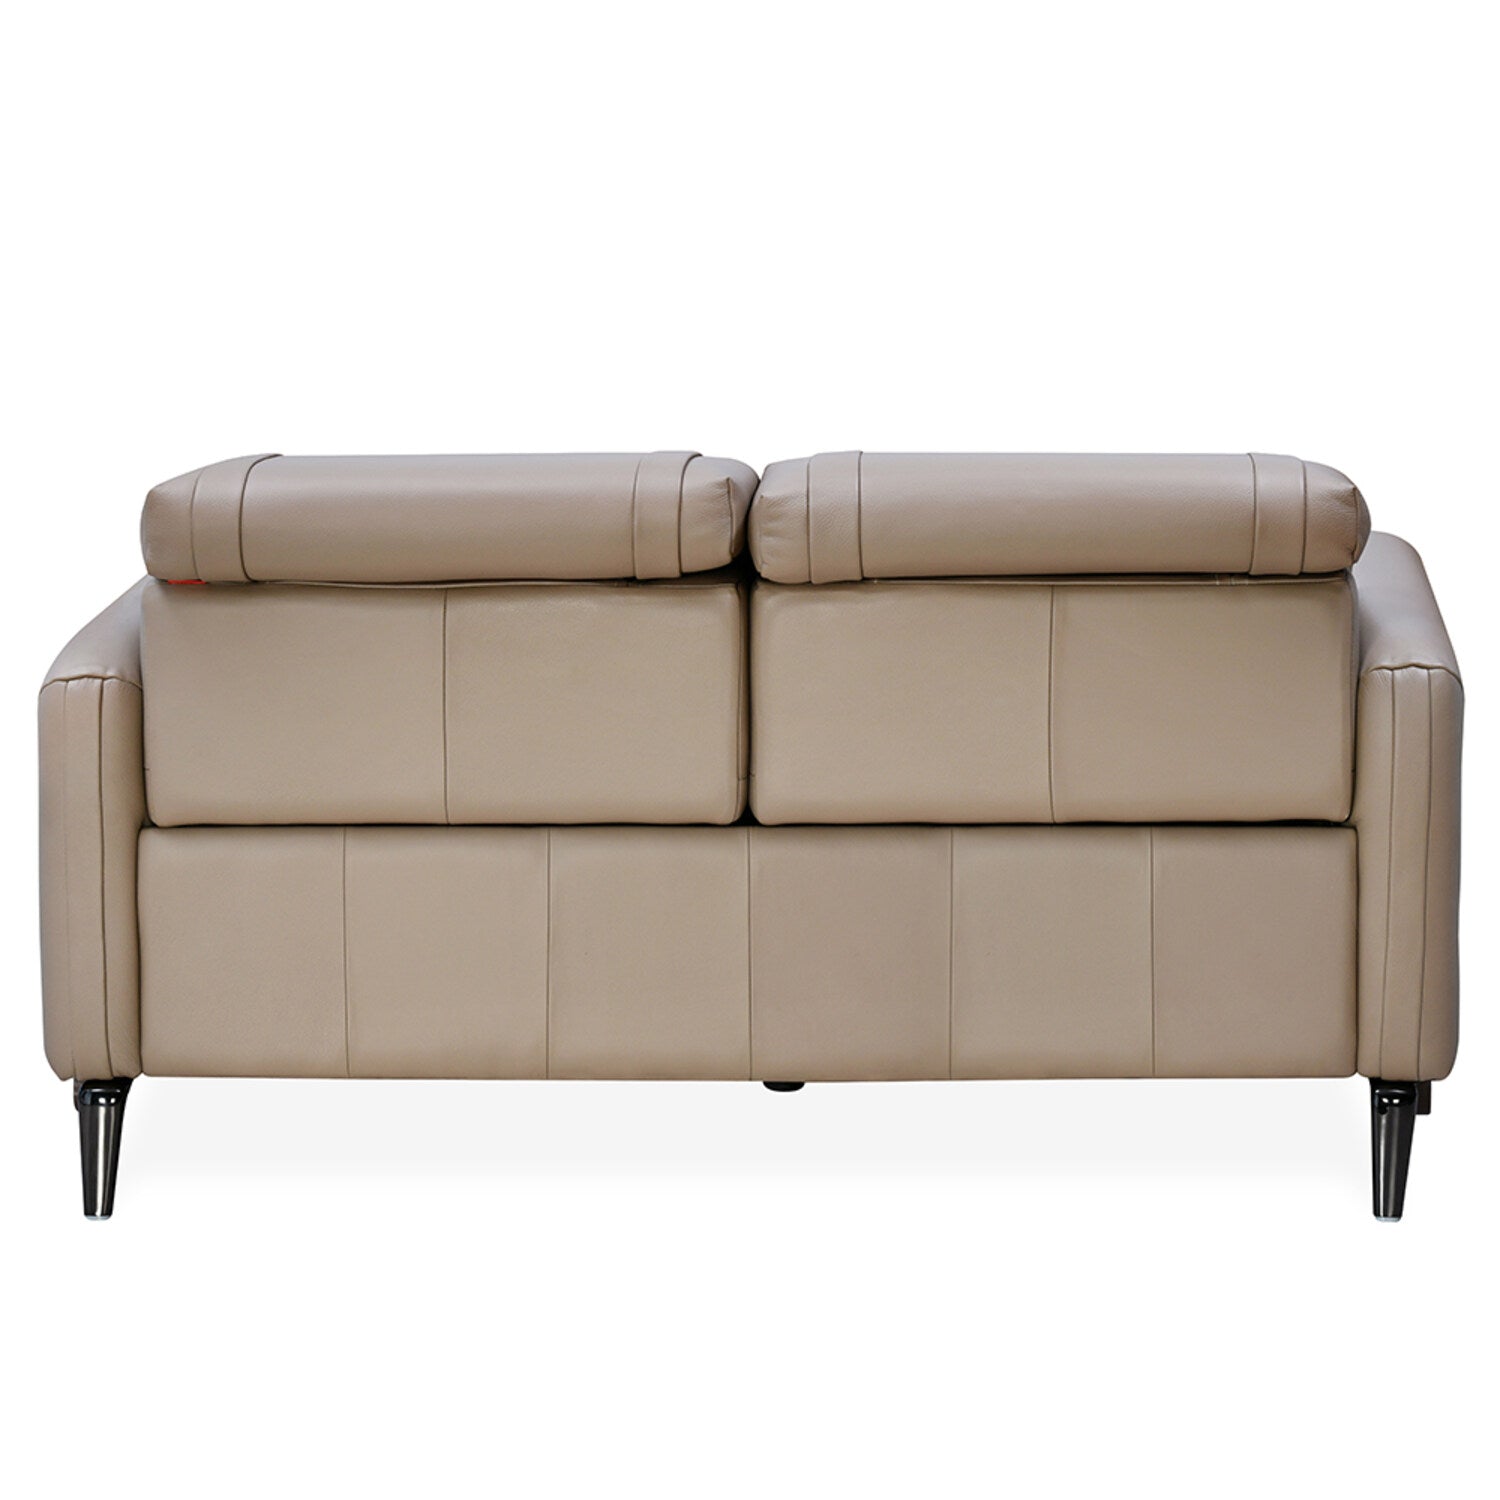 Olimpio 3 Seater Leather Electric Recliner (Beige)